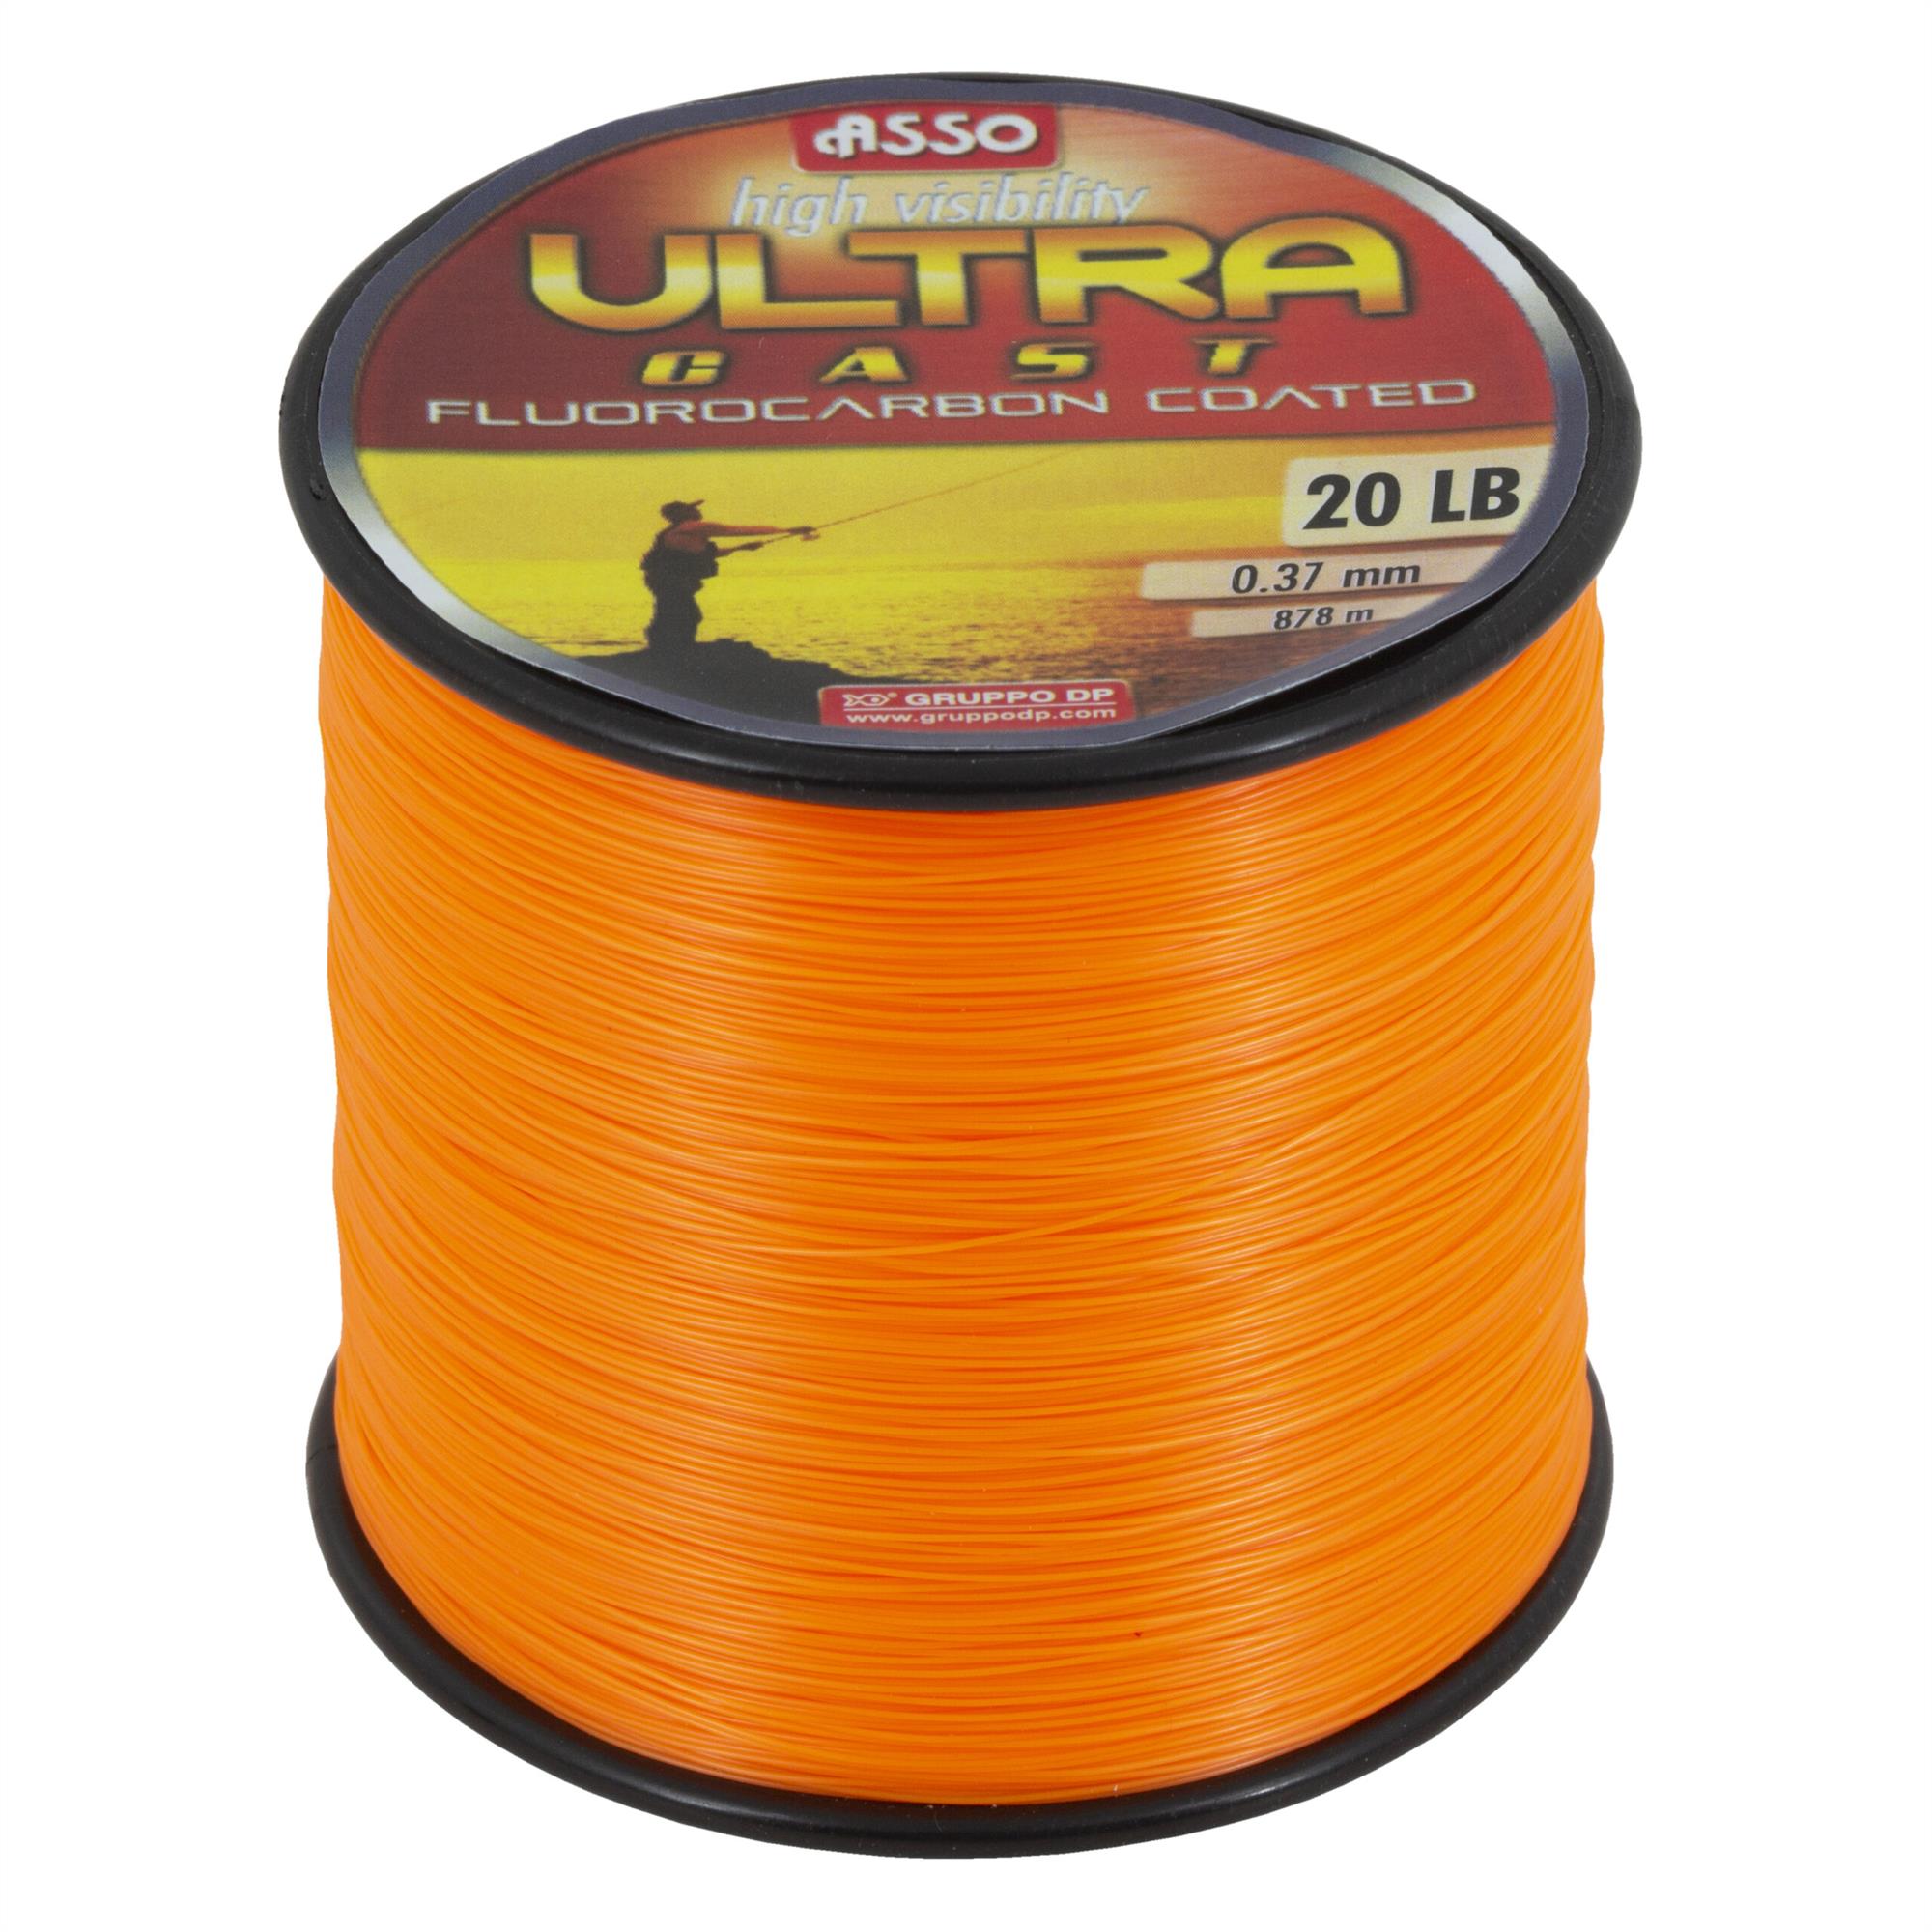 Asso UltraFlex Shockleader and Rig Body Sea Fishing Line Spool All Sizes